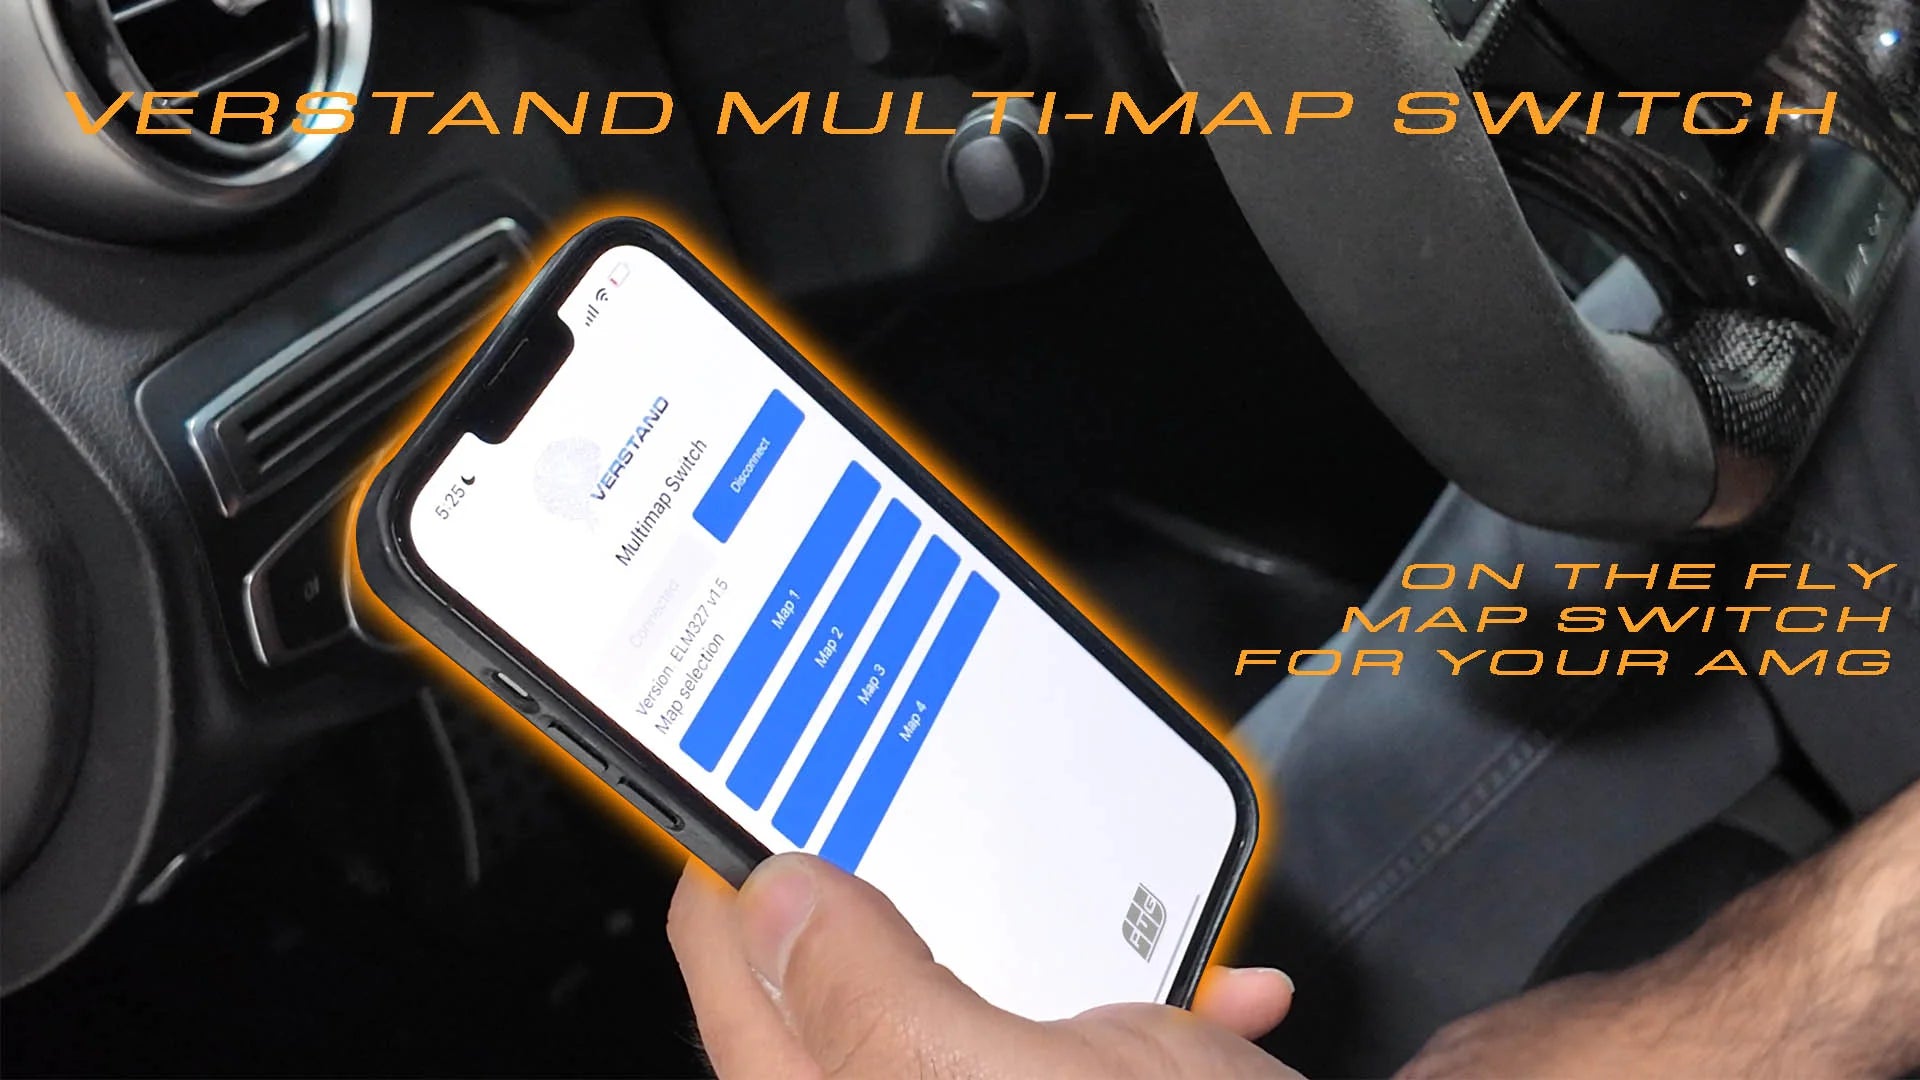 ON-THE-FLY ECU MULTI-MAP SWITCHING FOR MED17.7.5 EQUIPPED AMG'S